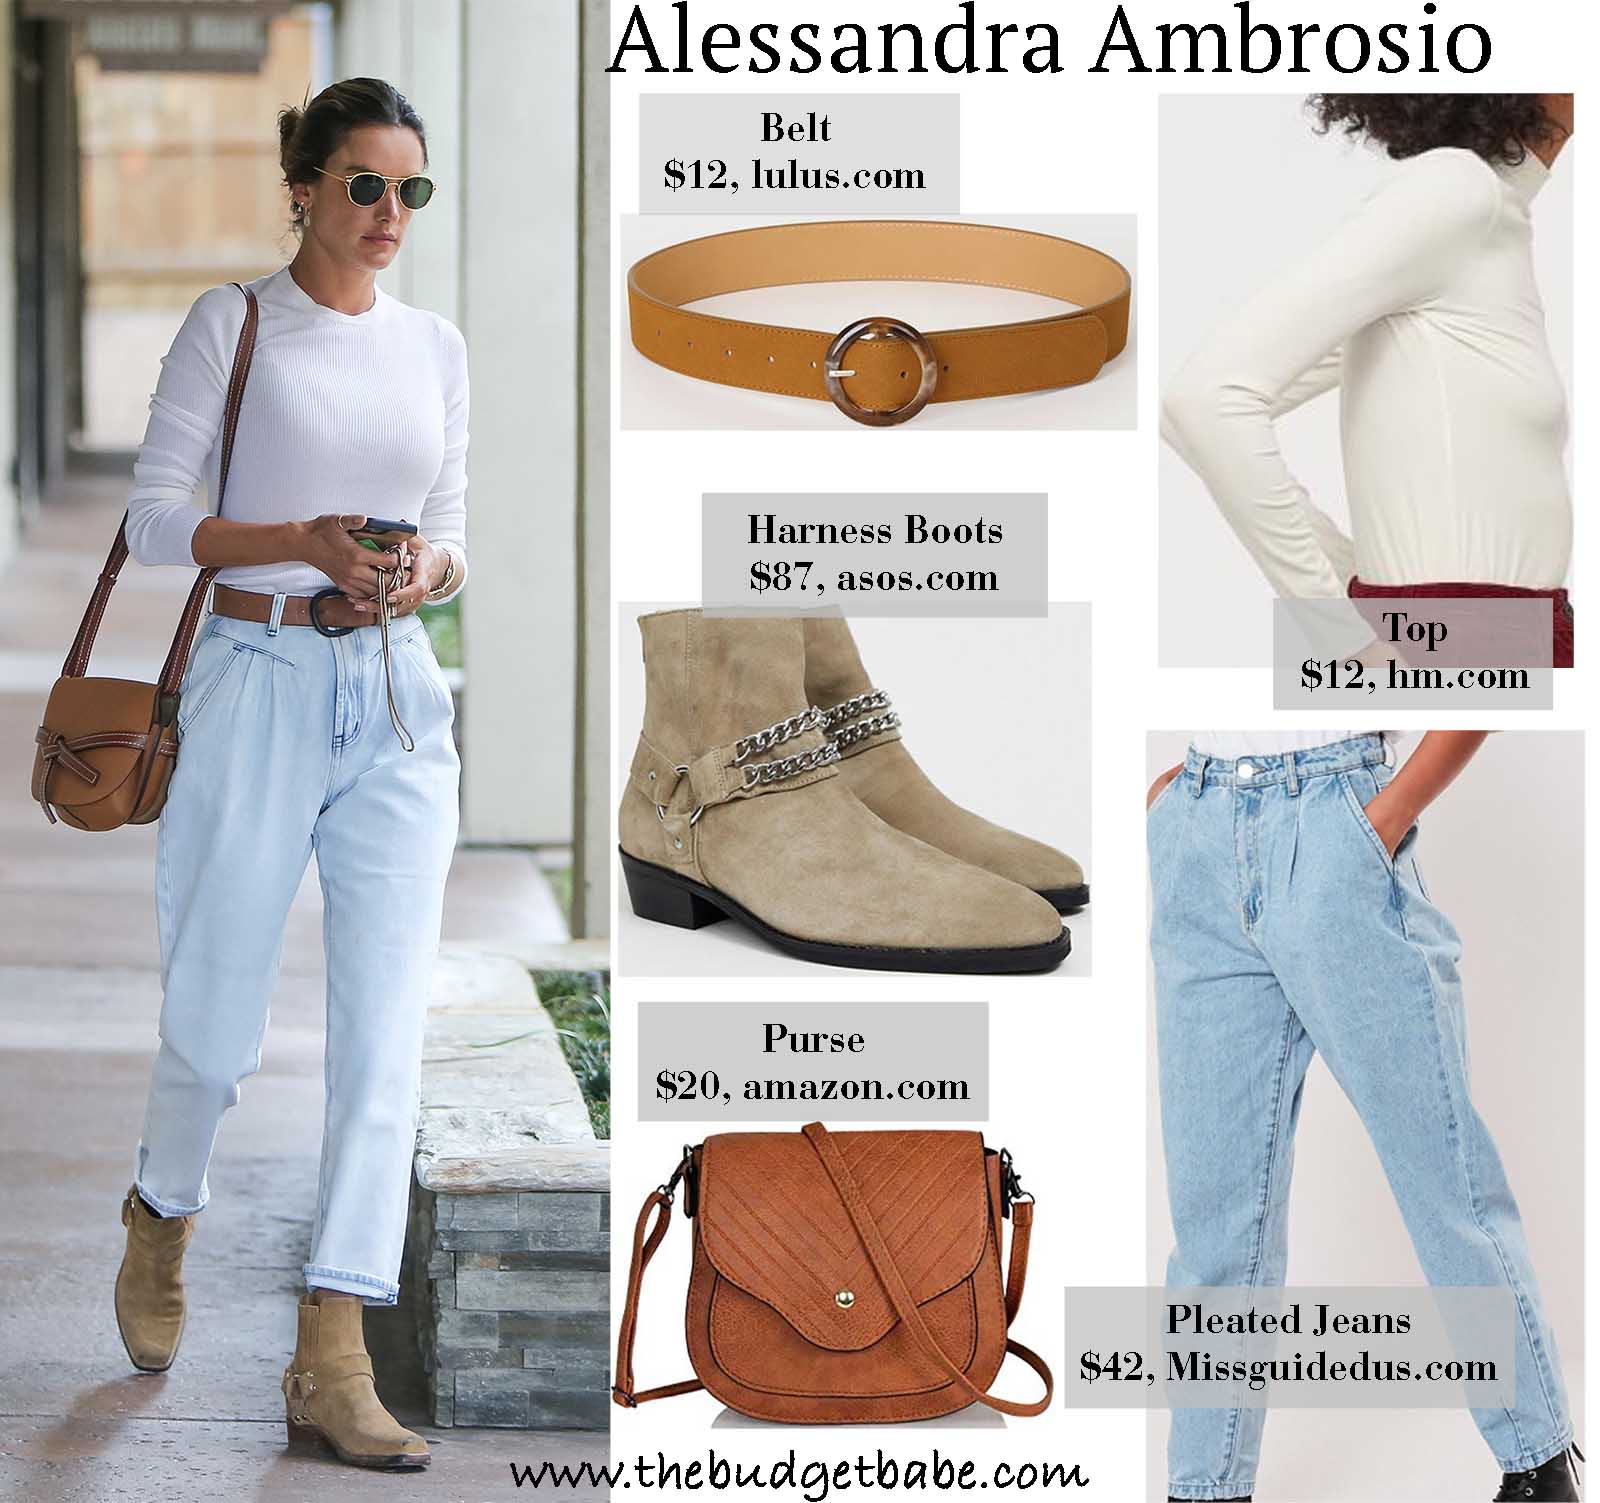 Alessandra's trendy denim is on our must-have list!